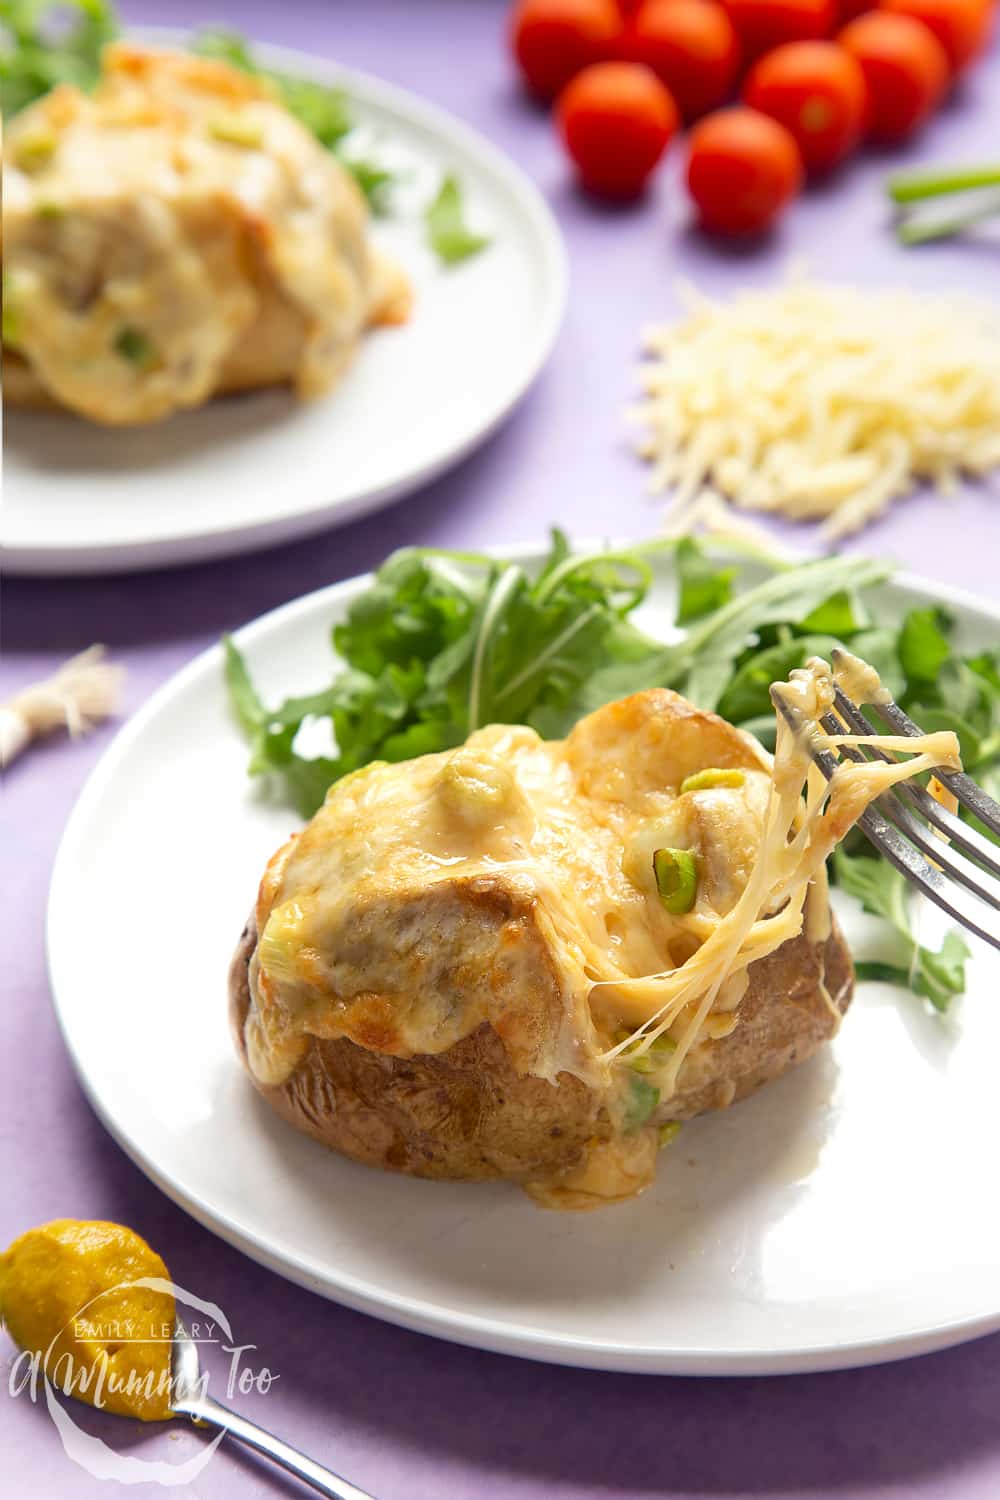 A cheese and onion jacket potato served on a white plate. A fork stretches the cheese from the potato.